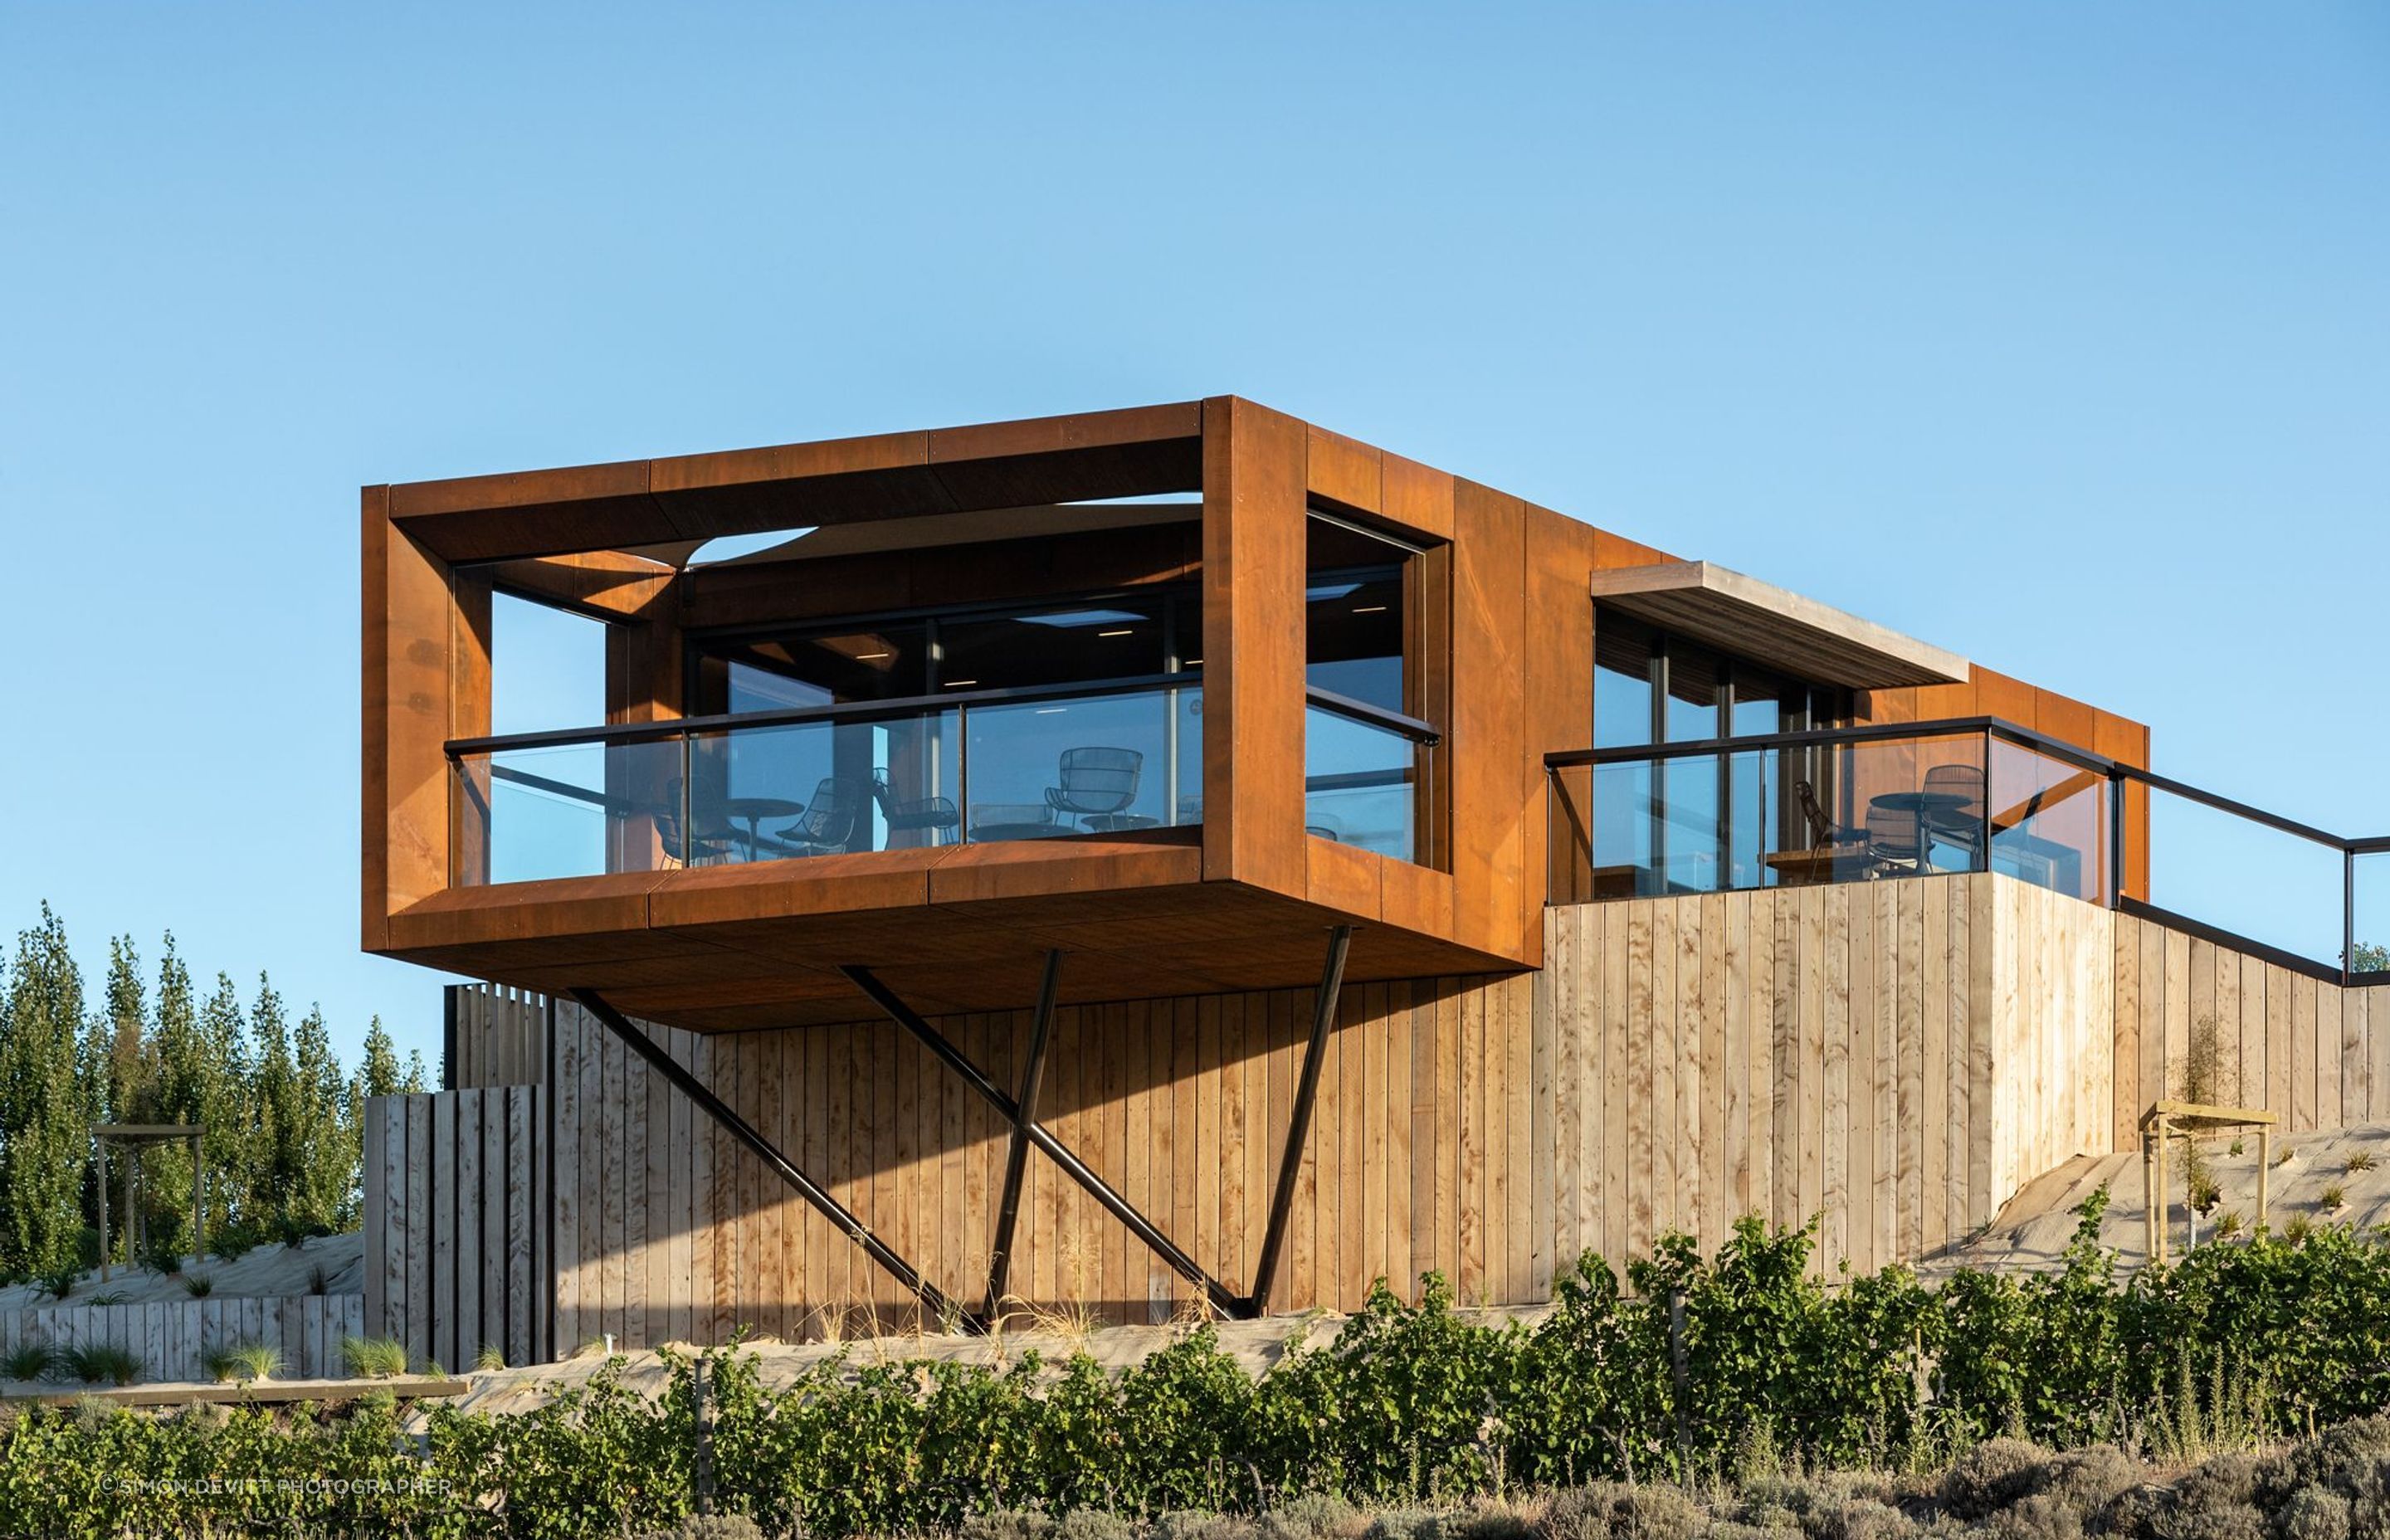 The eye-catching Te Kano Estate cellar door in Bannockburn by Hamish Muir and Matthew Barbour of Mason &amp; Wales Architects is a deceptively small and crafted design. “It's like a treasure box,” says Hamish.